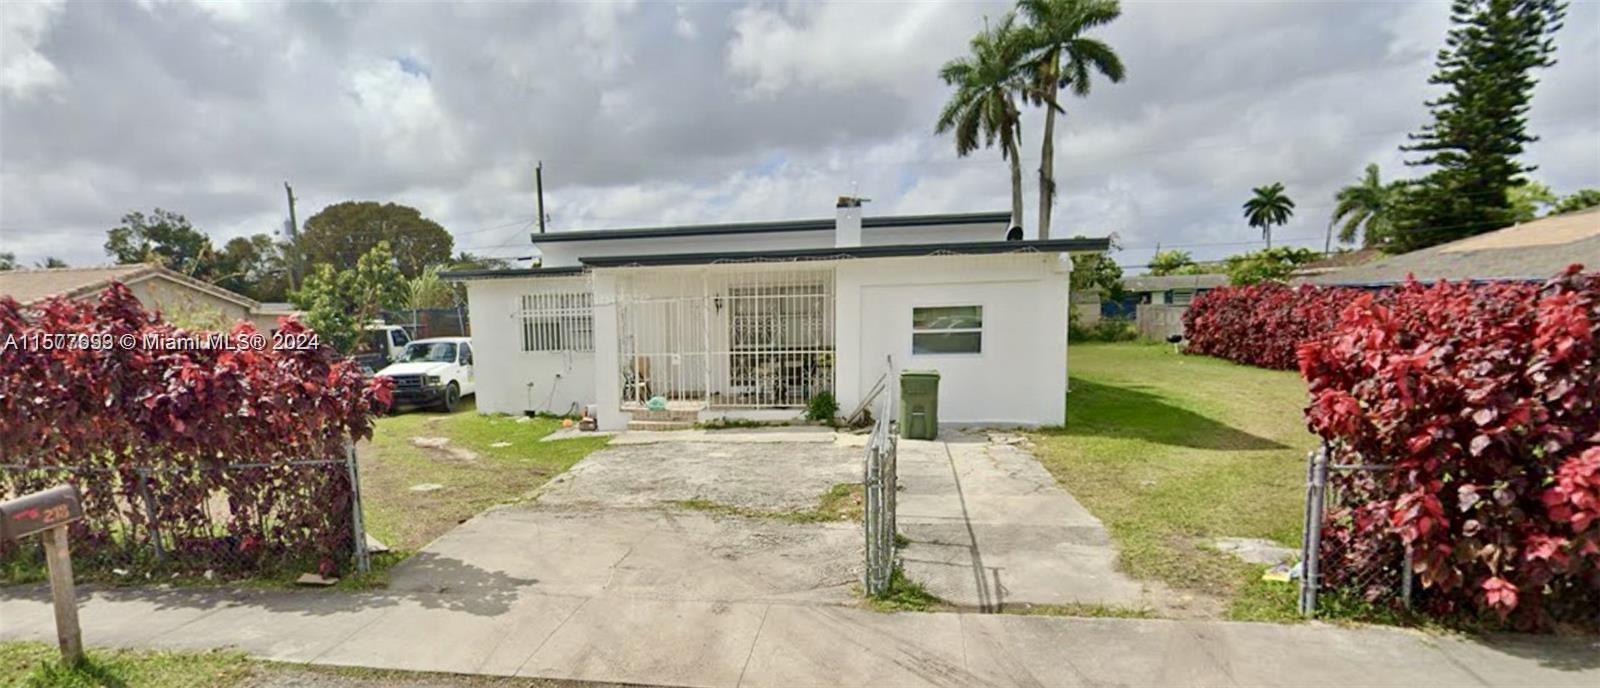 Photo of 218 NW 7th Ave in Homestead, FL